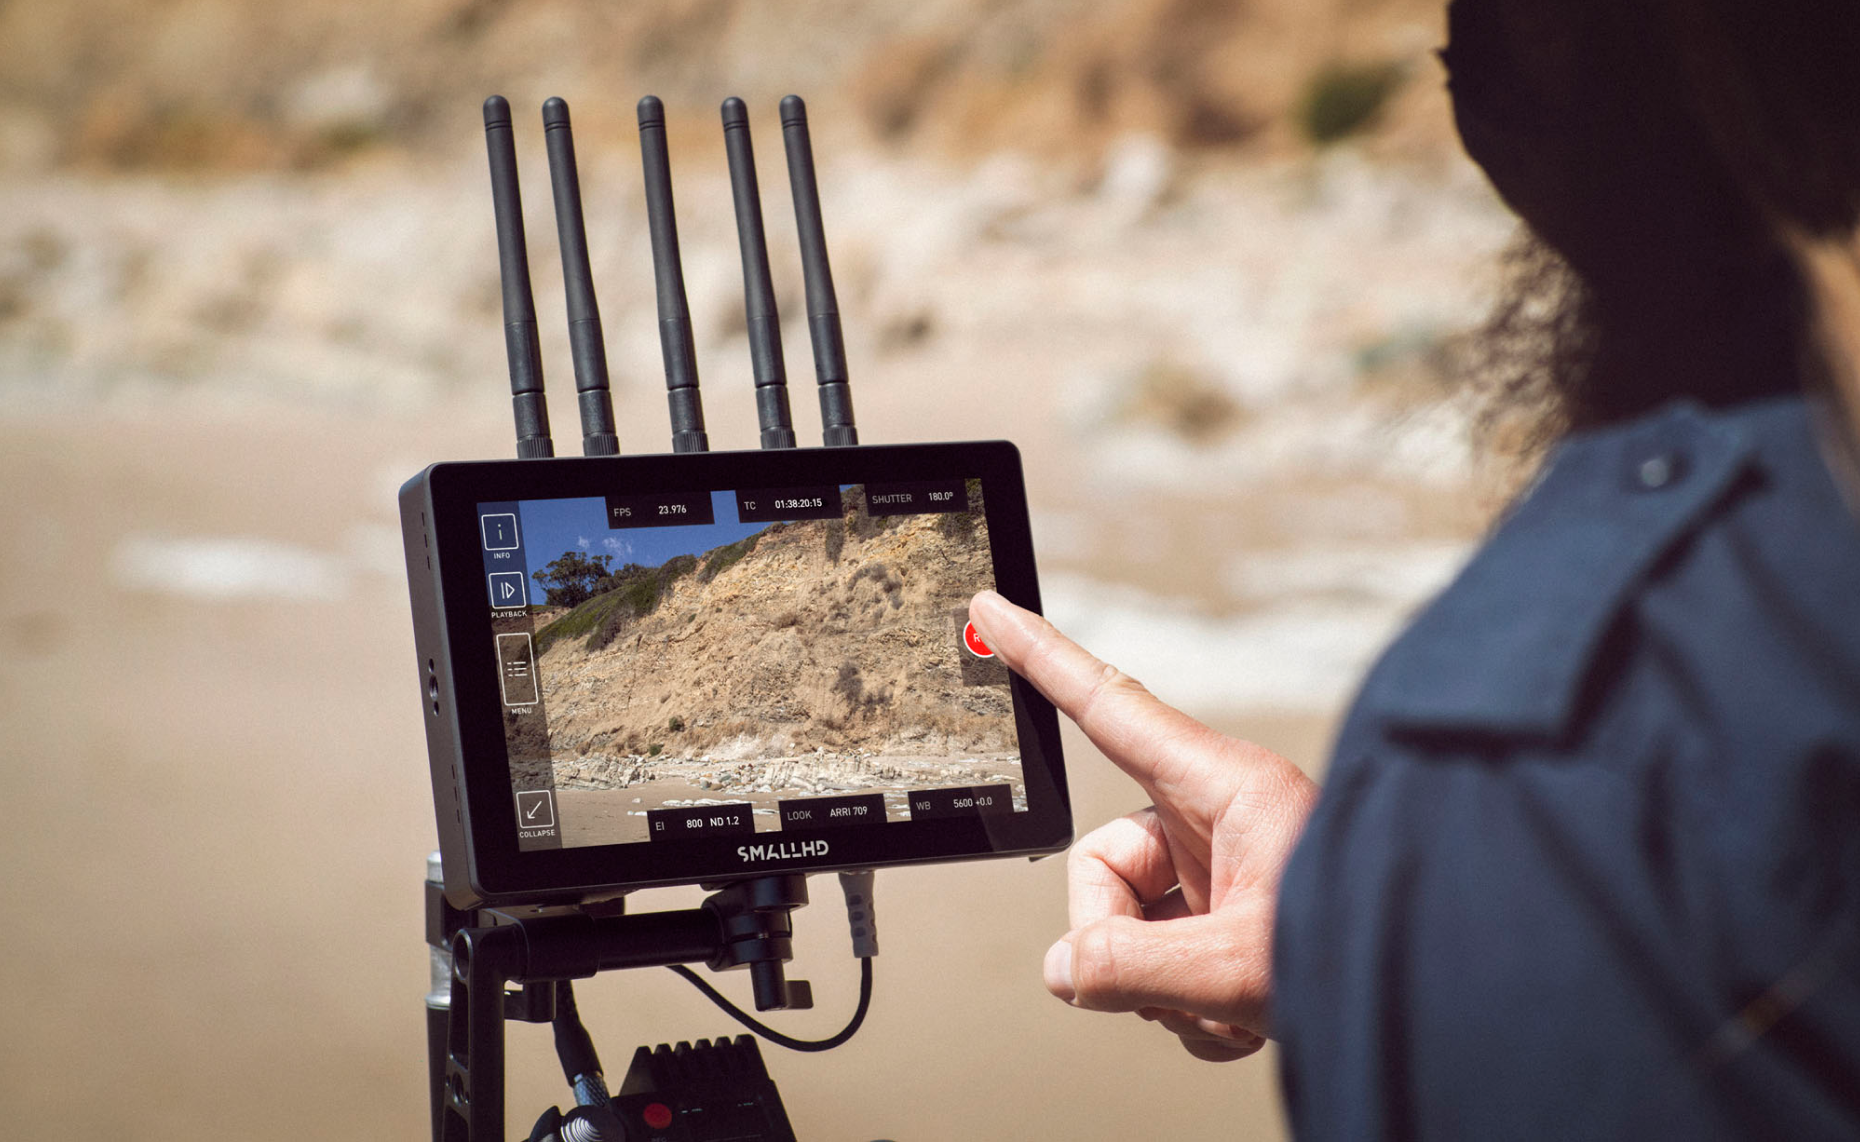 SmallHD monitor with Bolt 4K monitor module receiver featuring wireless camera control